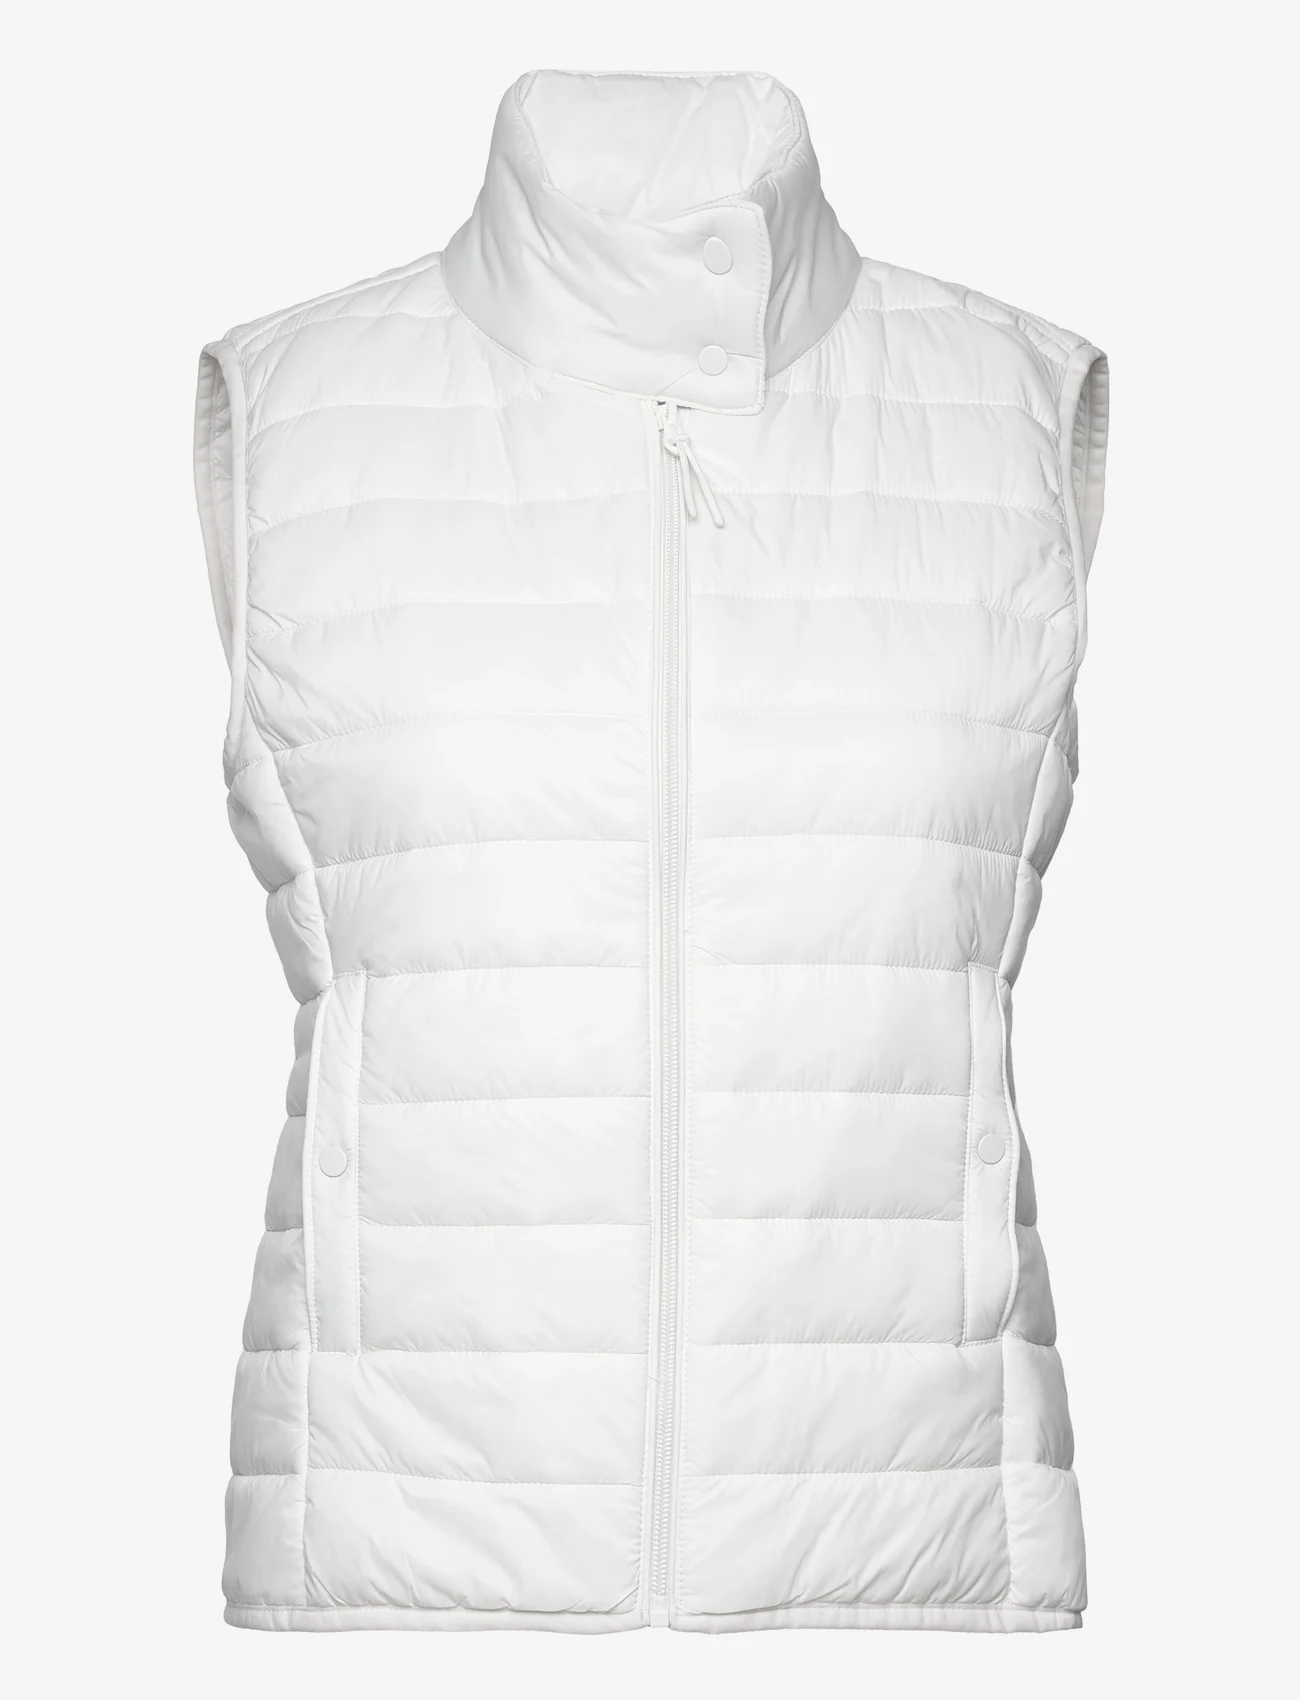 United Colors of Benetton - WAISTCOAT - down- & padded jackets - white - 0